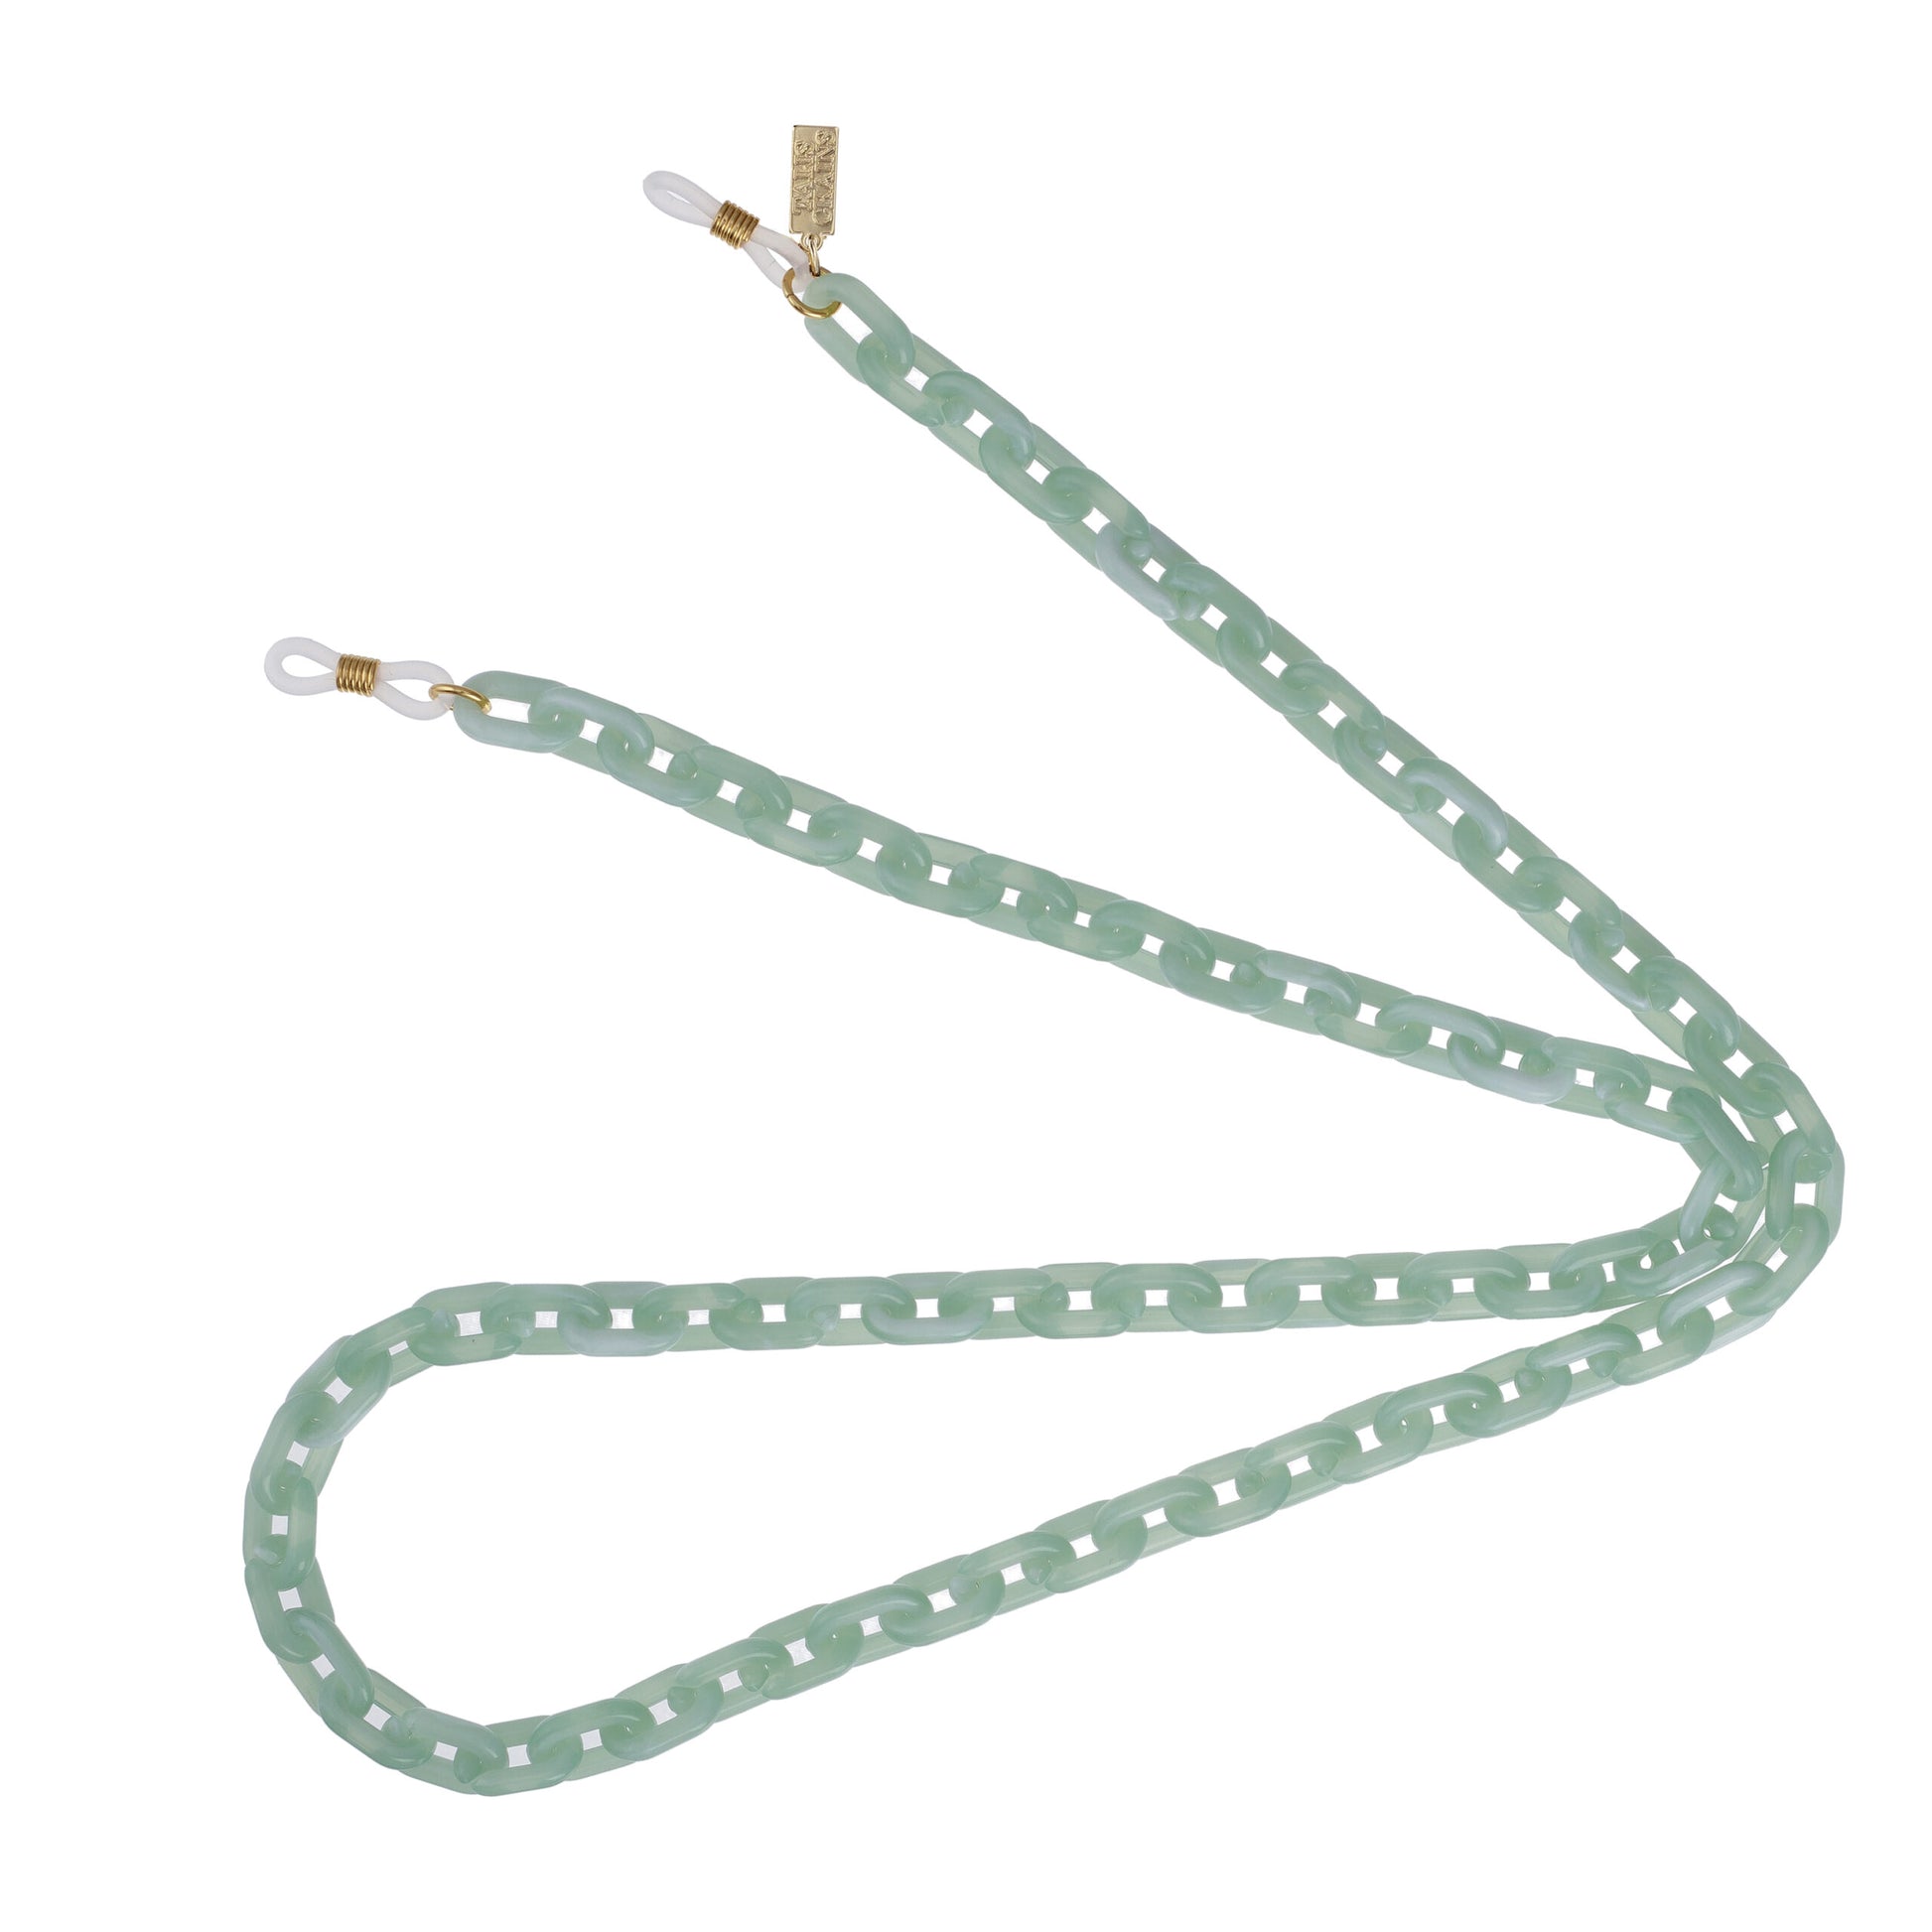 A Talis Chains Resin Light Sunglasses Chain - Mint with polka dots on it.